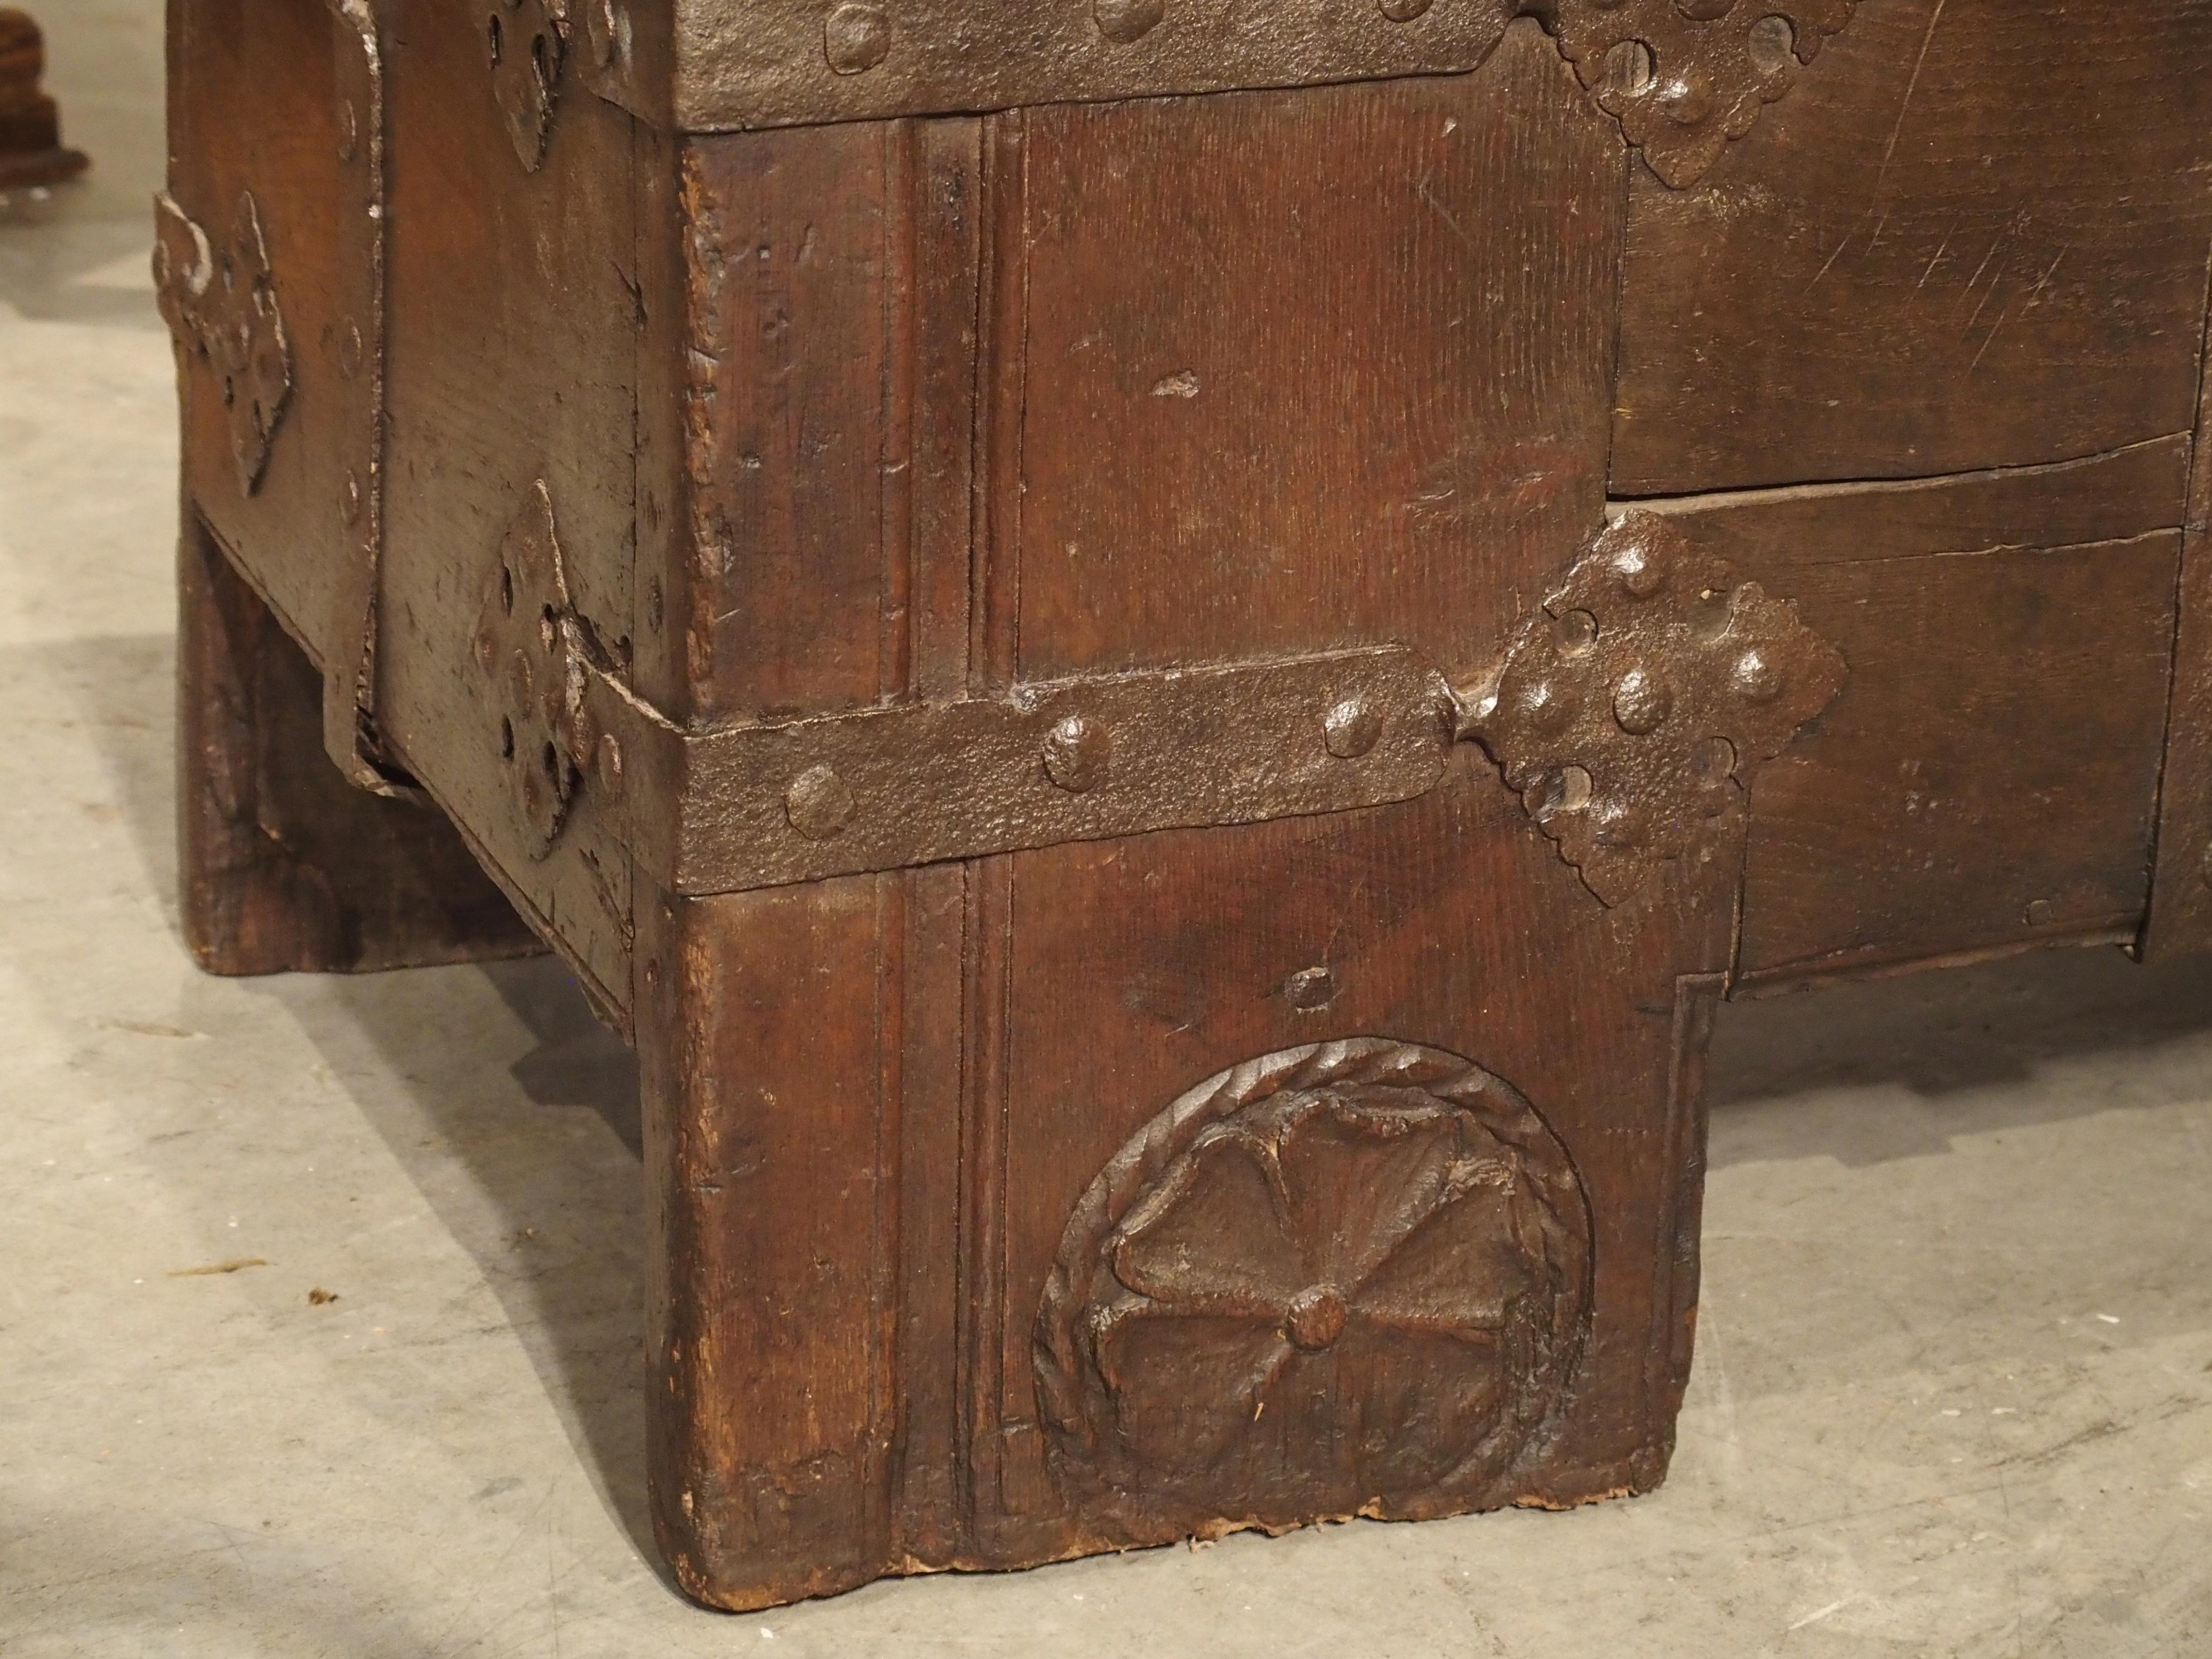 This oak and iron stollentruhe was made well over 400 years ago in Westphalia, Germany, circa 1550. Westphalia is a region in western Germany that was part of the Holy Roman Empire during the time this chest was constructed (Late Middle Ages). The